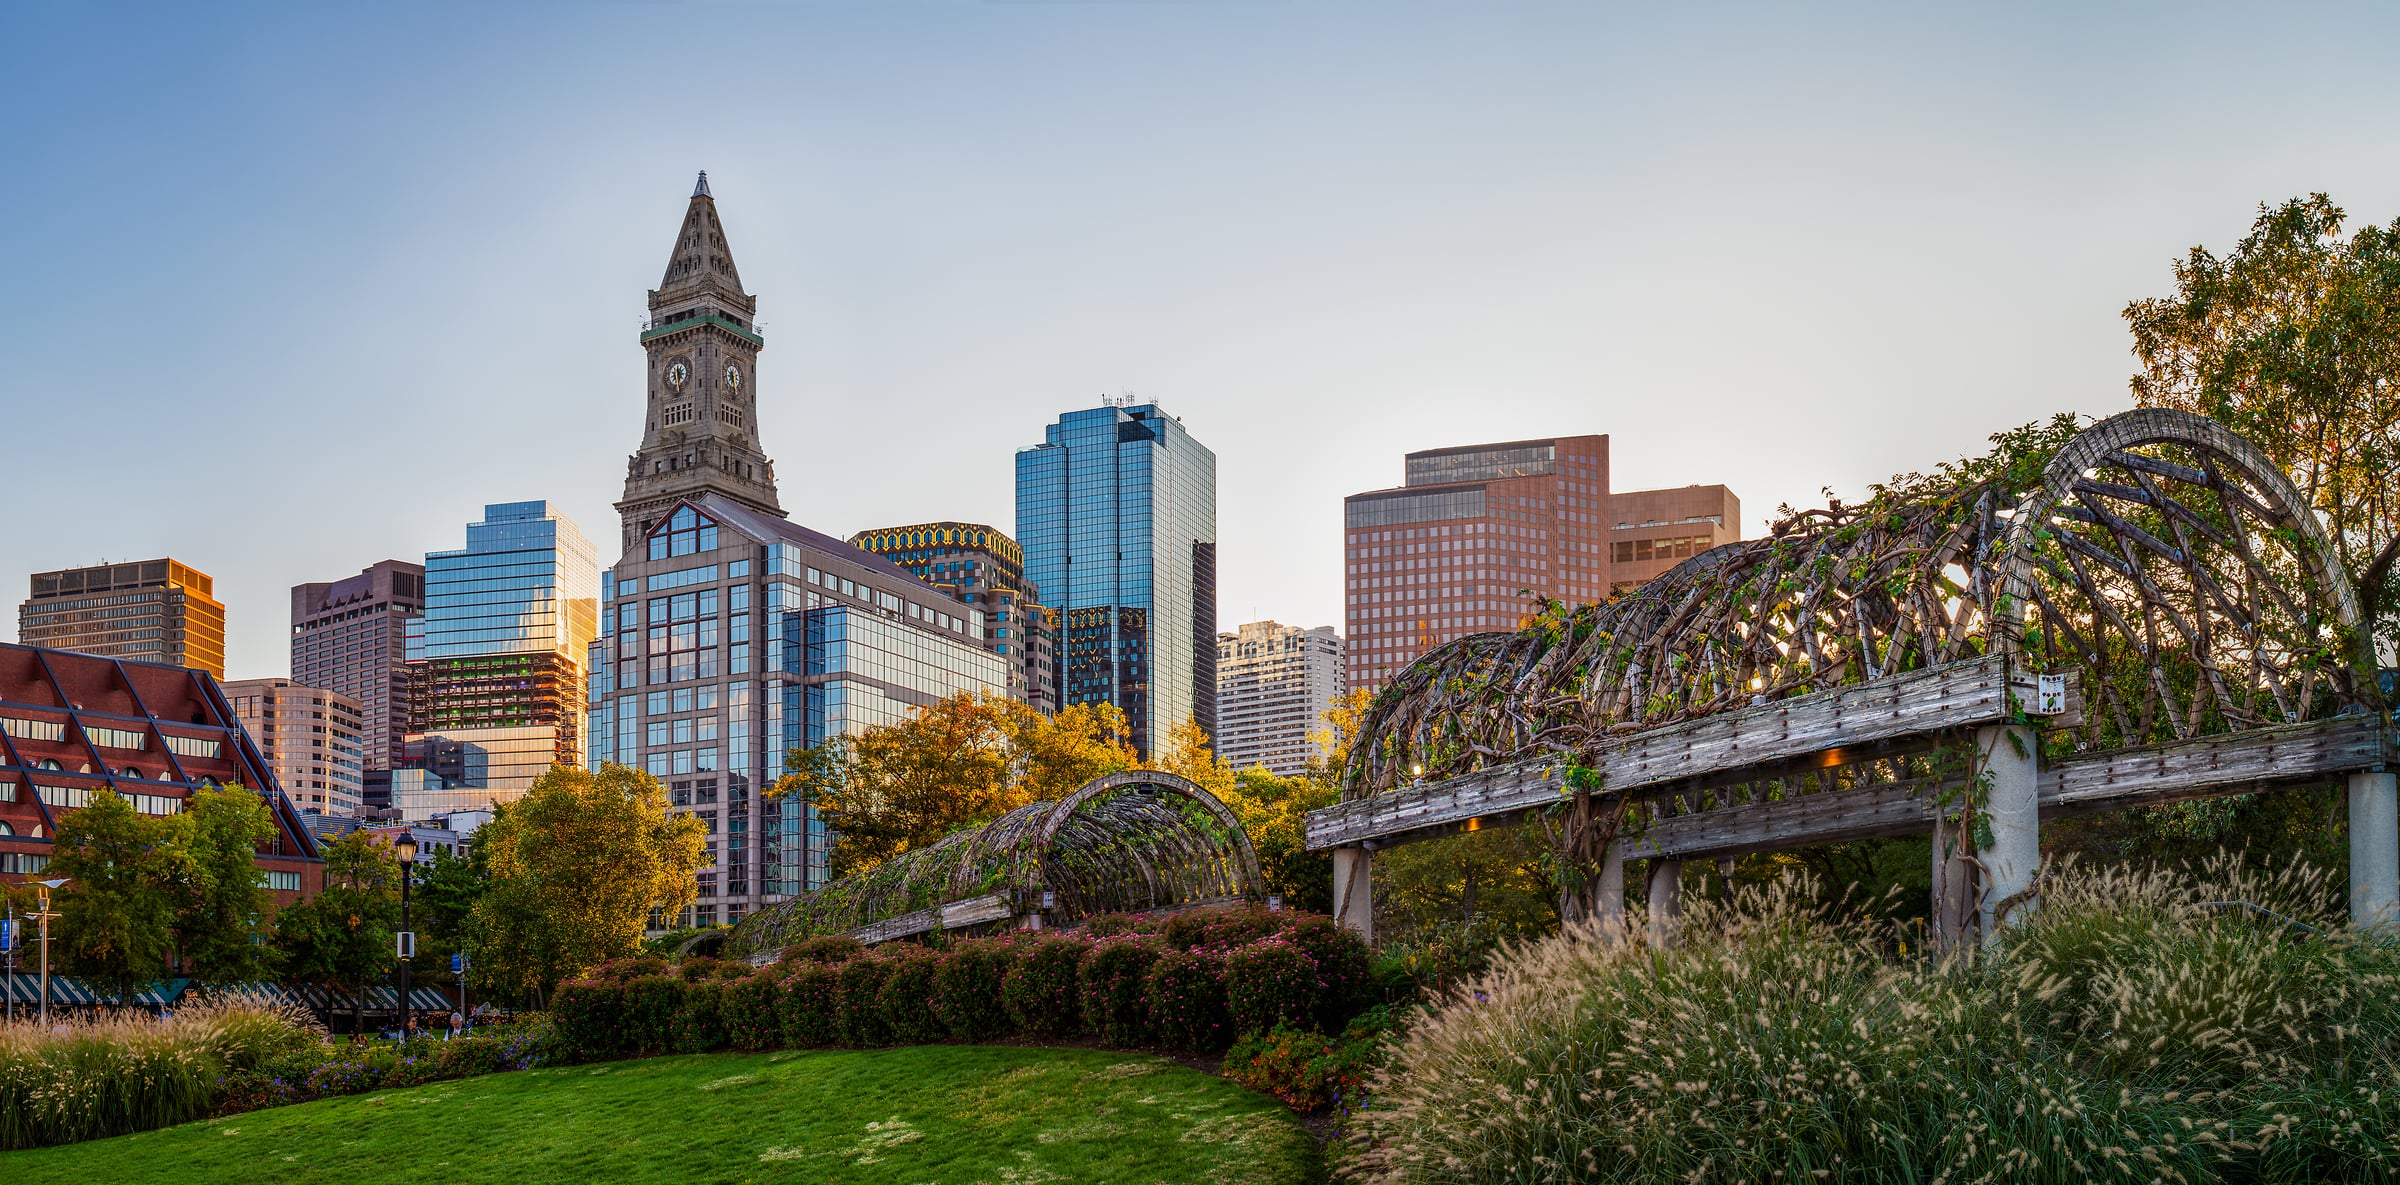 217 megapixels! A very high resolution, large-format VAST photo print of Christopher Columbus Waterfront Park in Boston; photograph created by Jim Tarpo in Boston, Massachusetts.